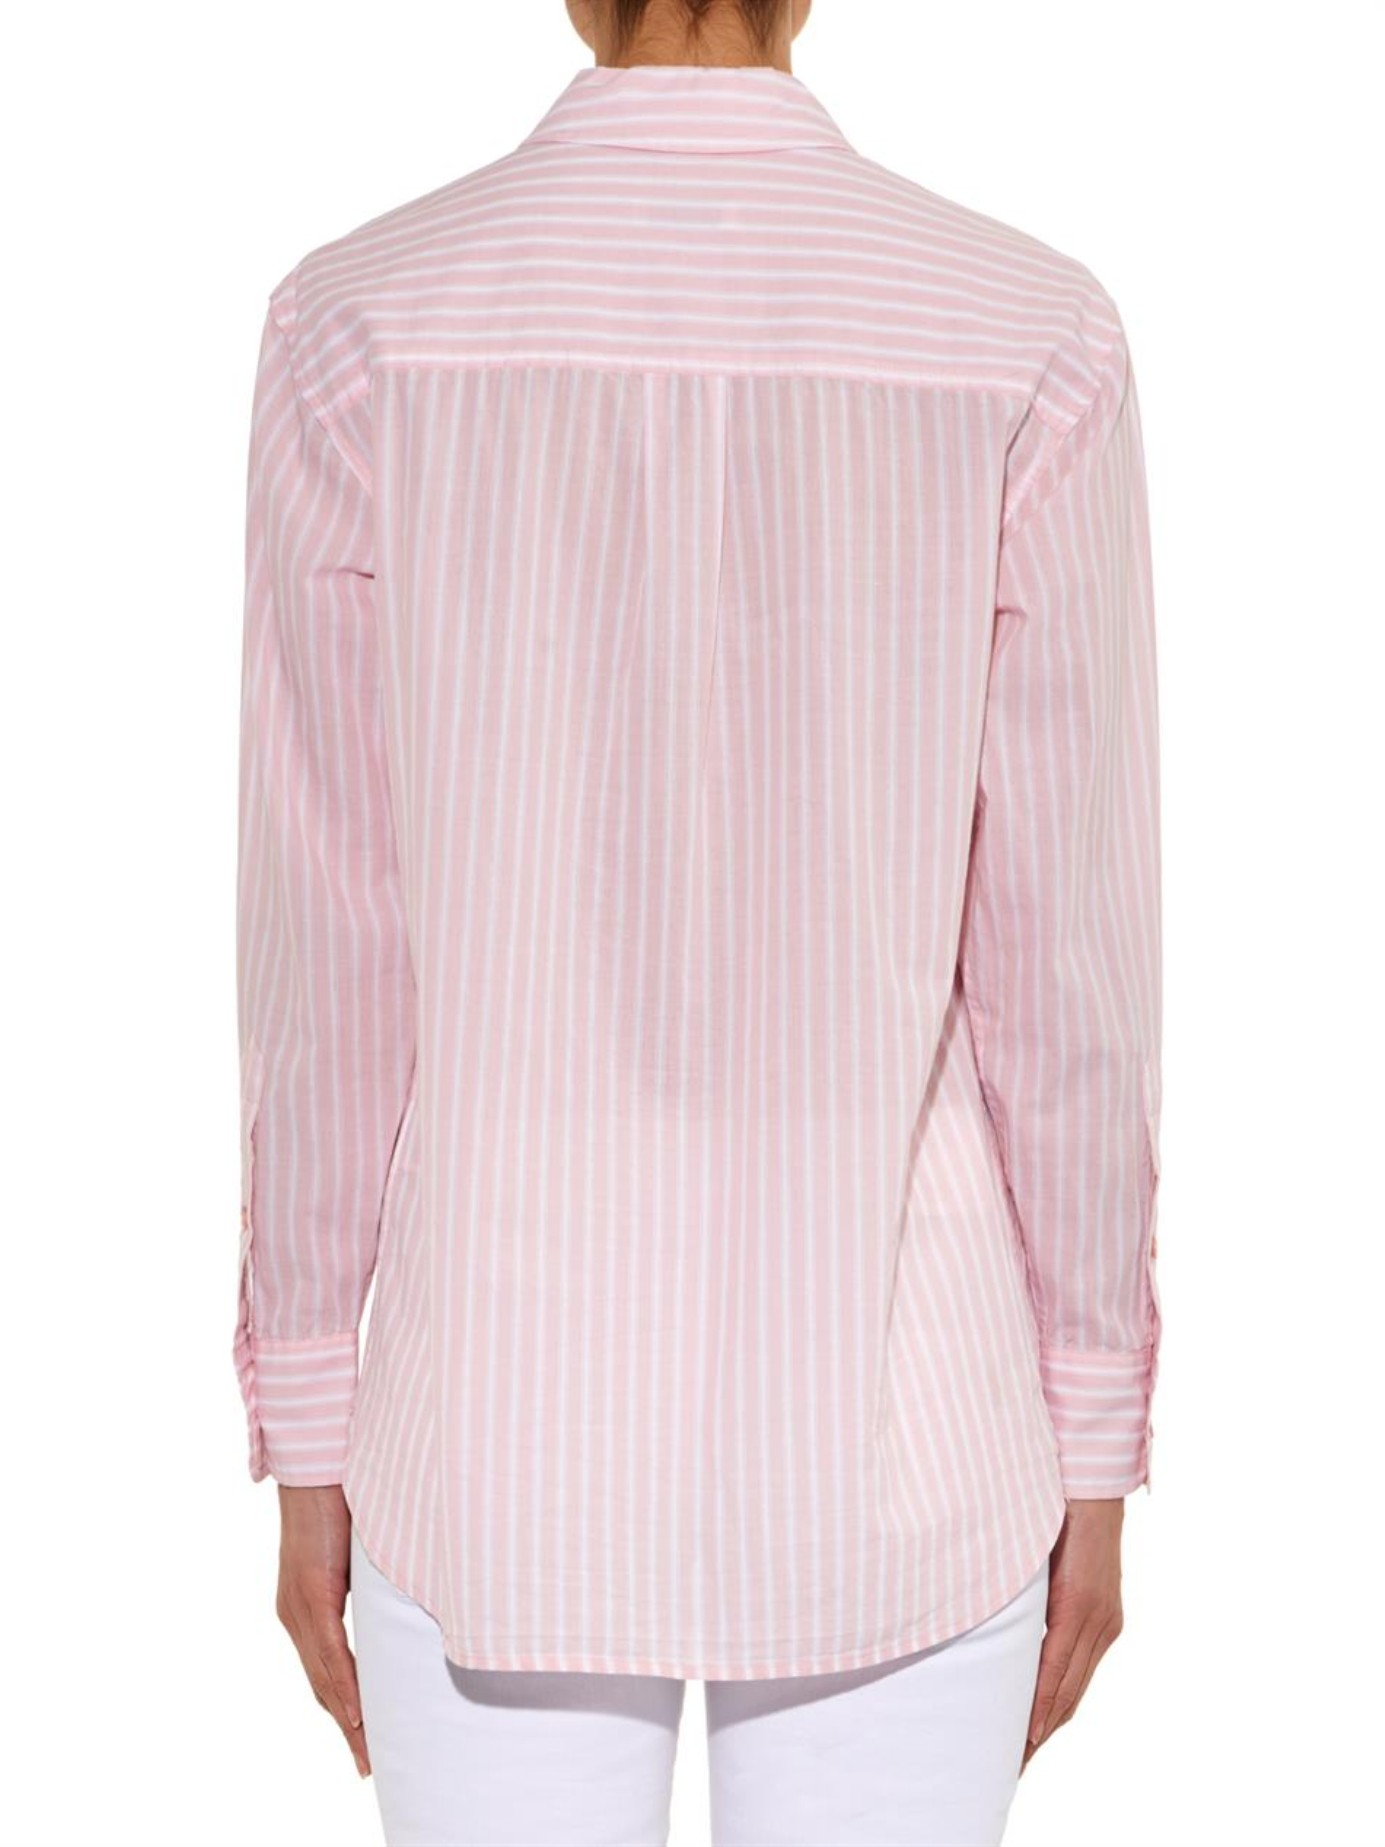 Lyst - Equipment Striped Cotton Shirt in Pink